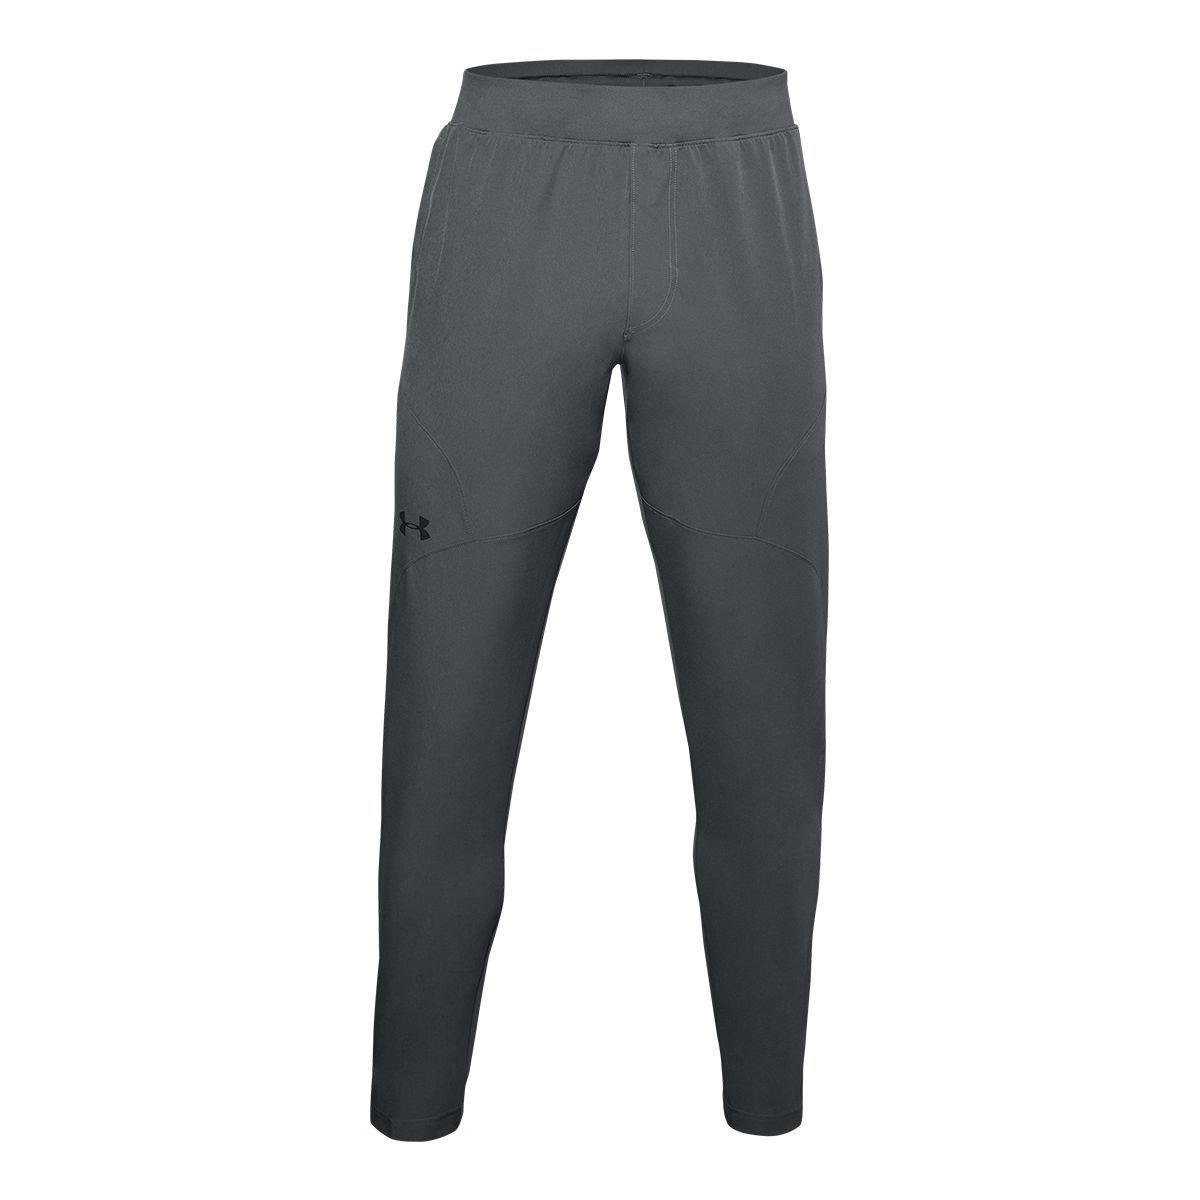 Under Armour Women's Links Pants Golf Casual Tapered Stretch